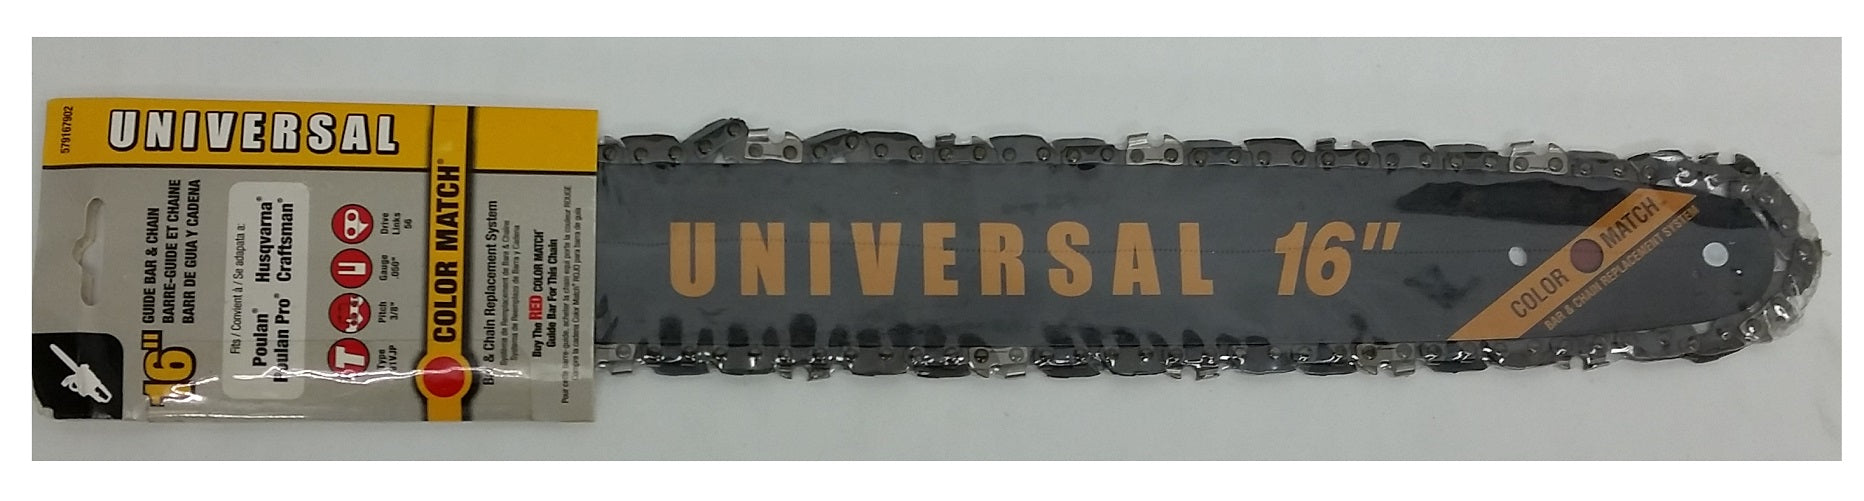 Universal 16" Replacement Guide Bar And Chain Combo